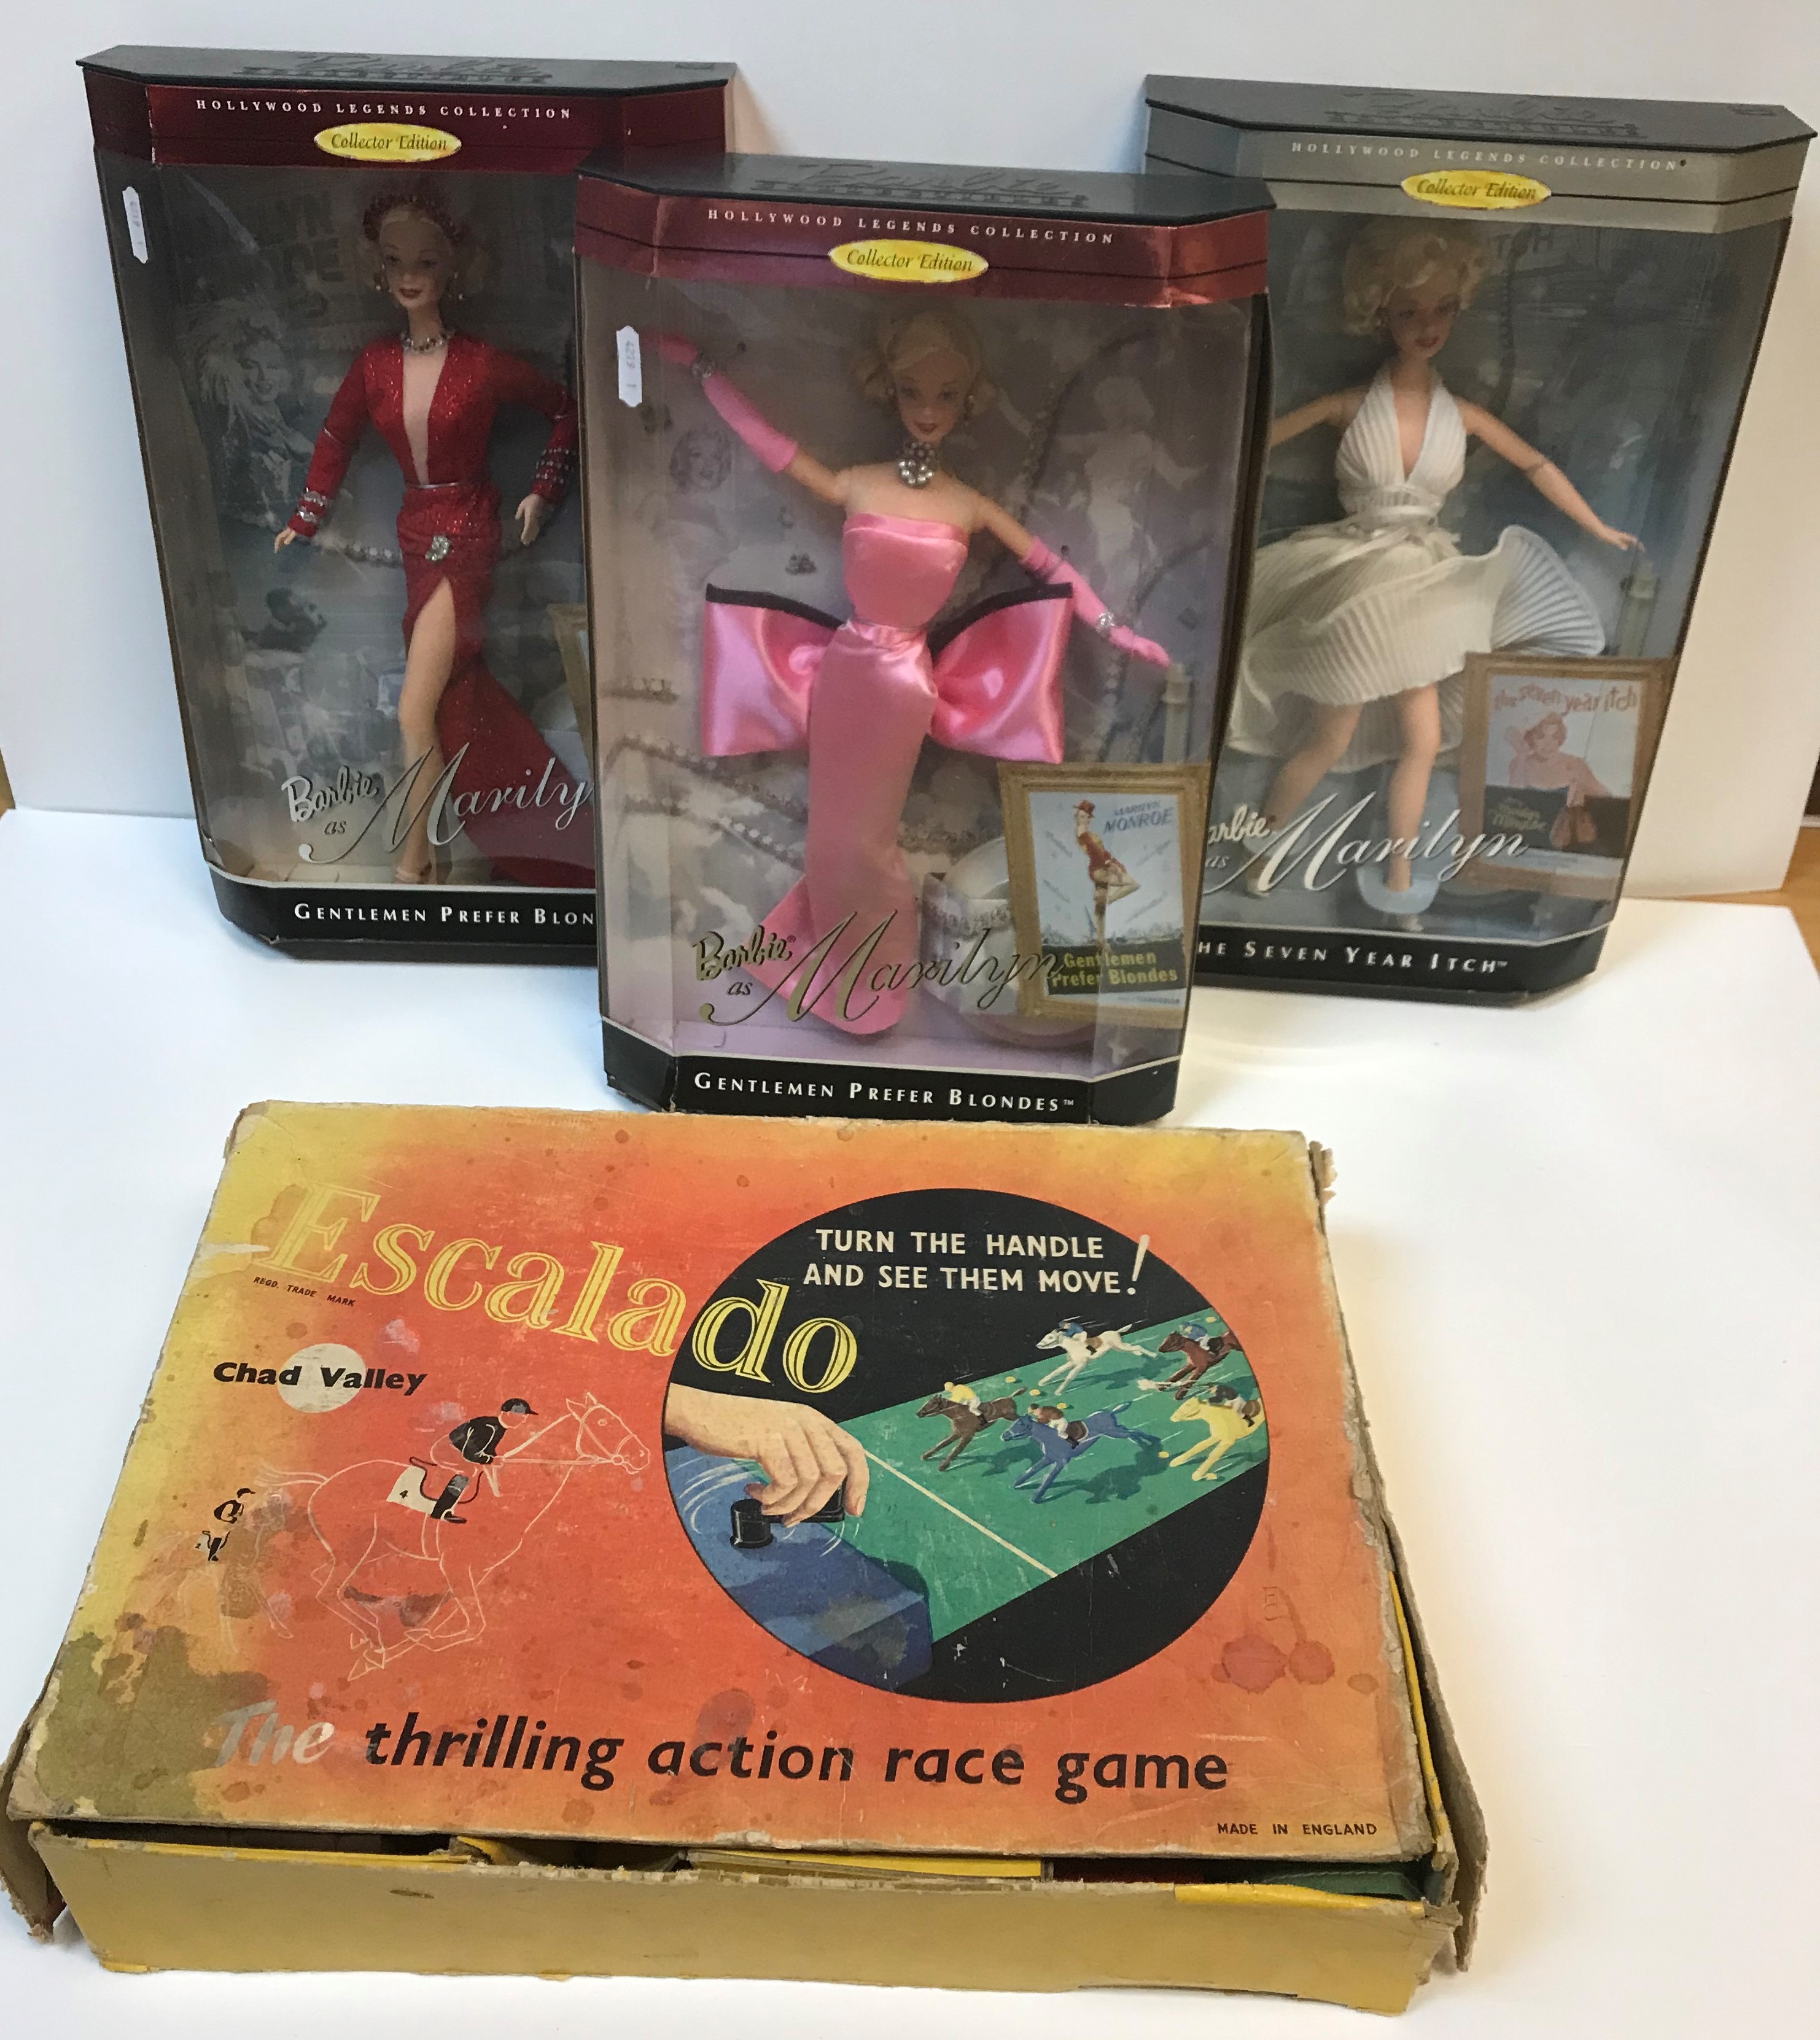 A set of three collector edition Hollywood Legends Collection Barbie as Marilyn dolls comprising The